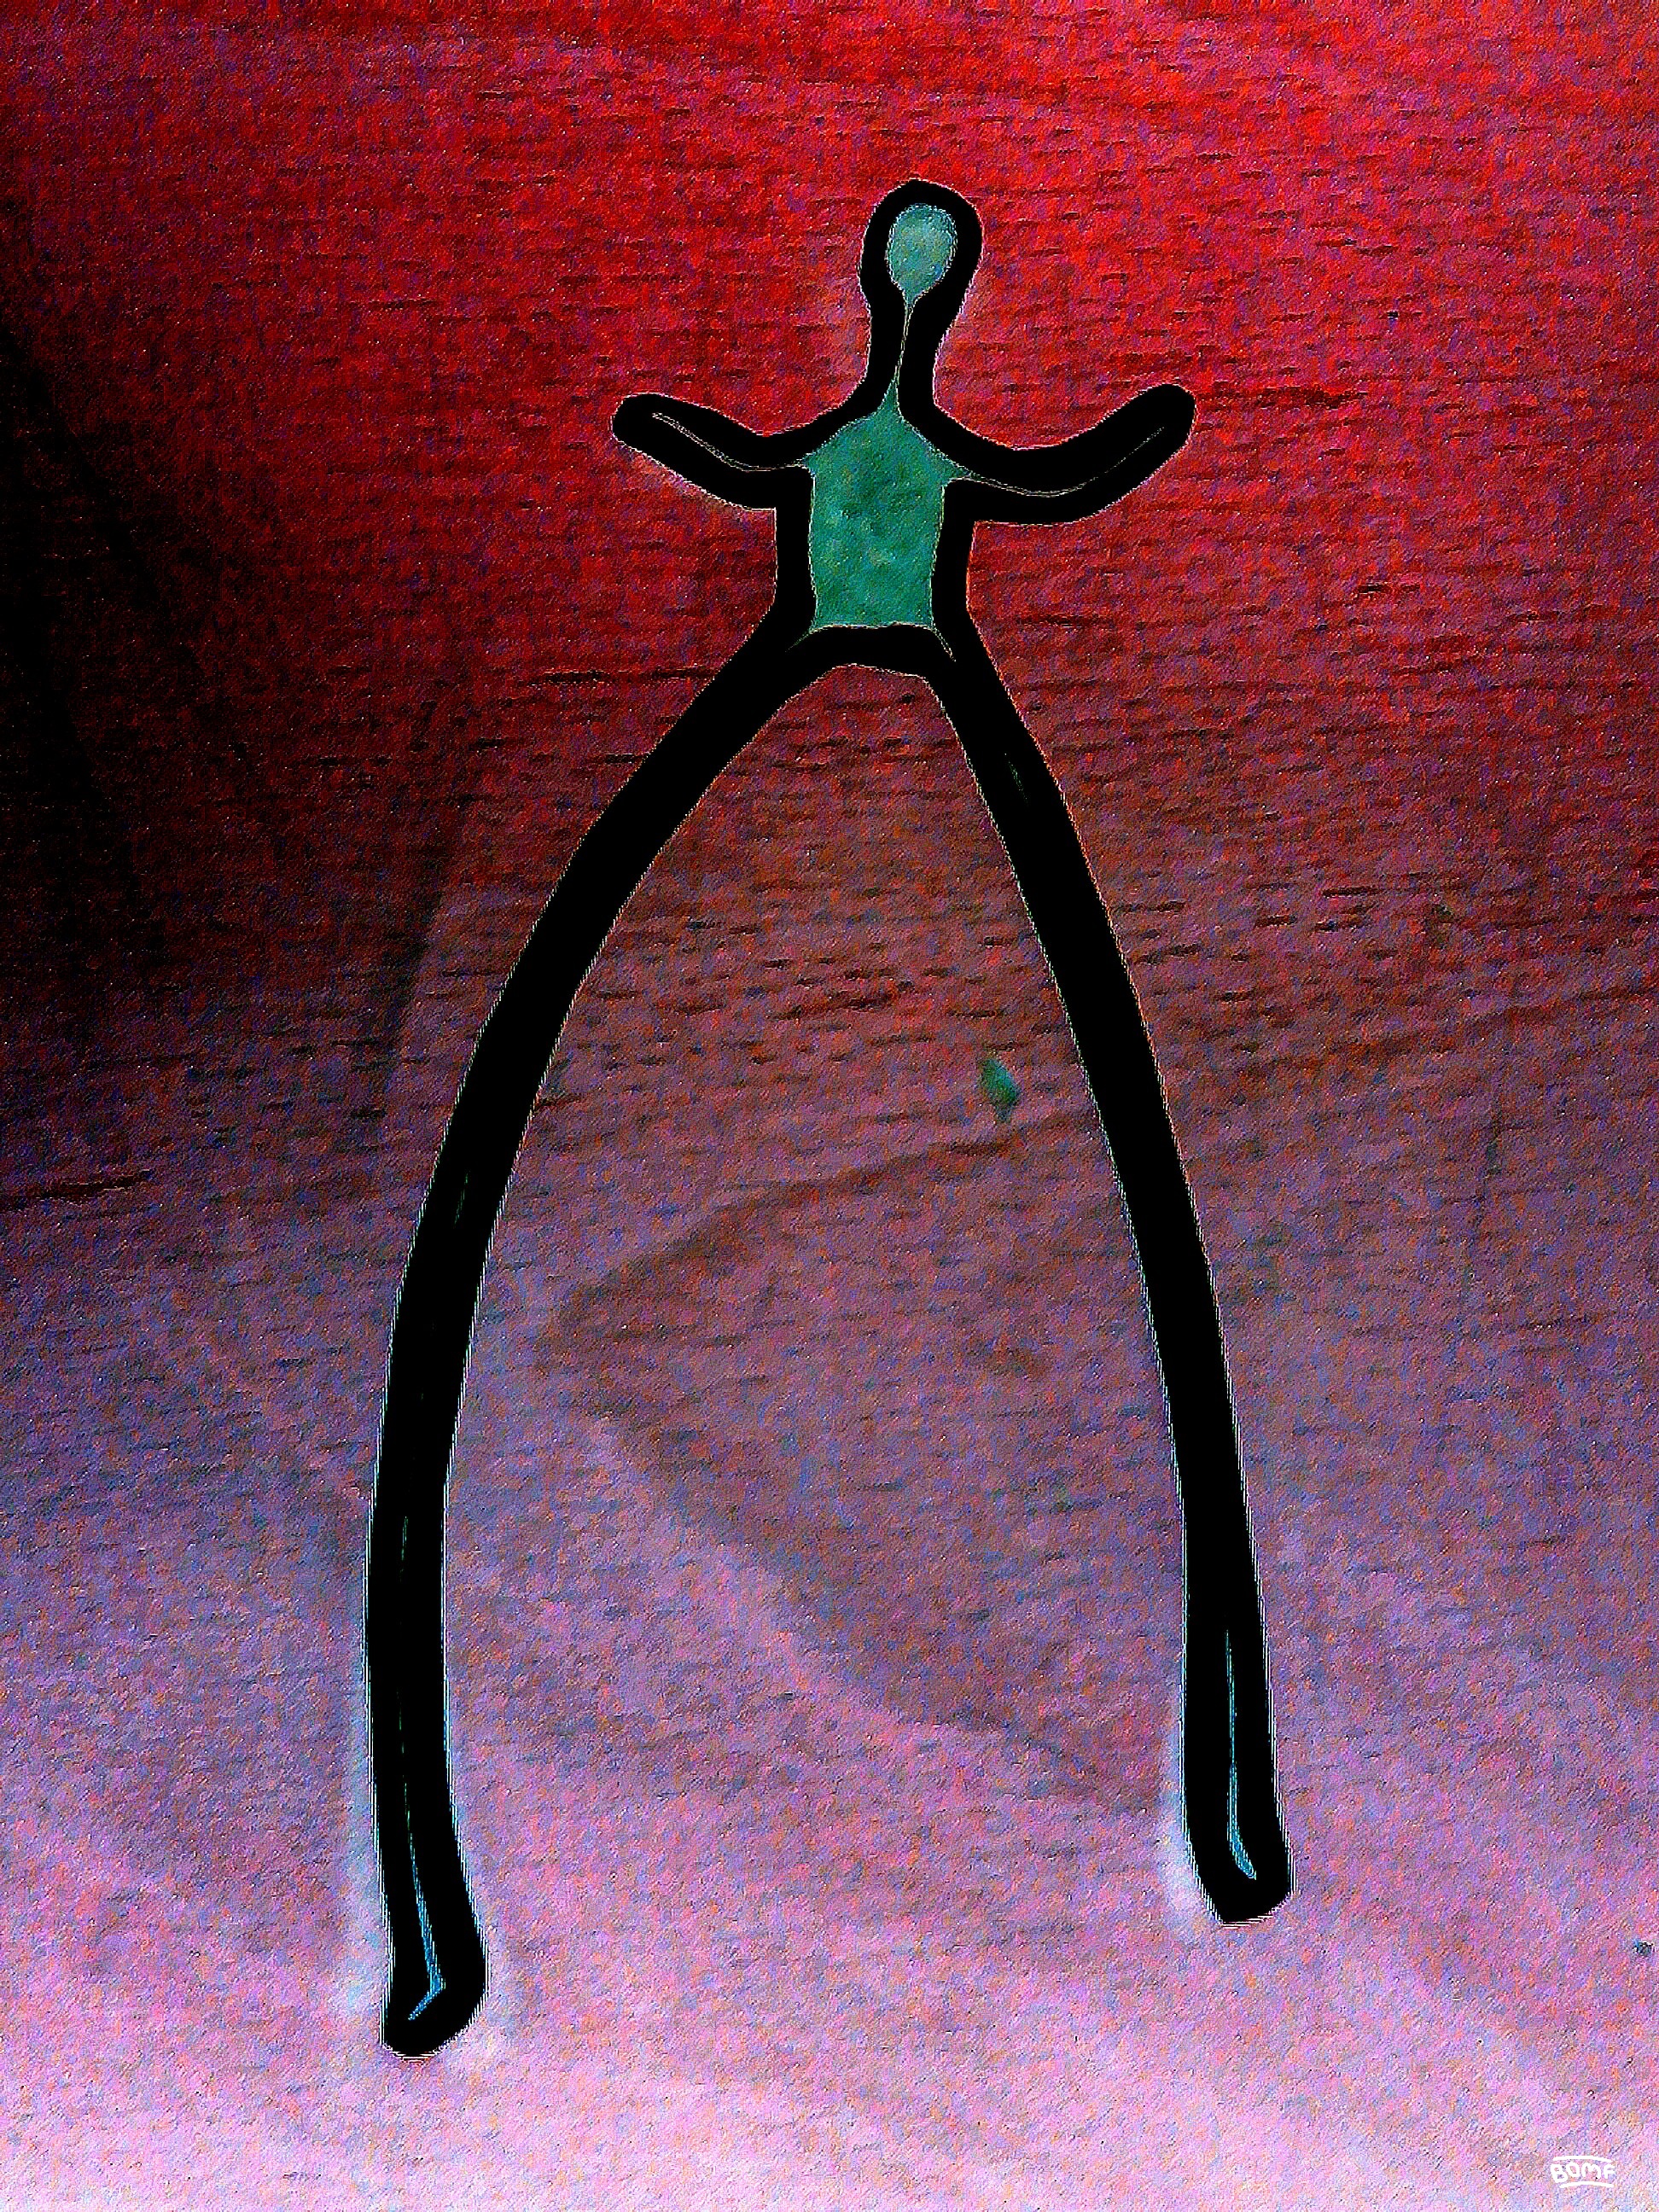 very lanky humanoid figure taking a big step on a red and teal gradient background